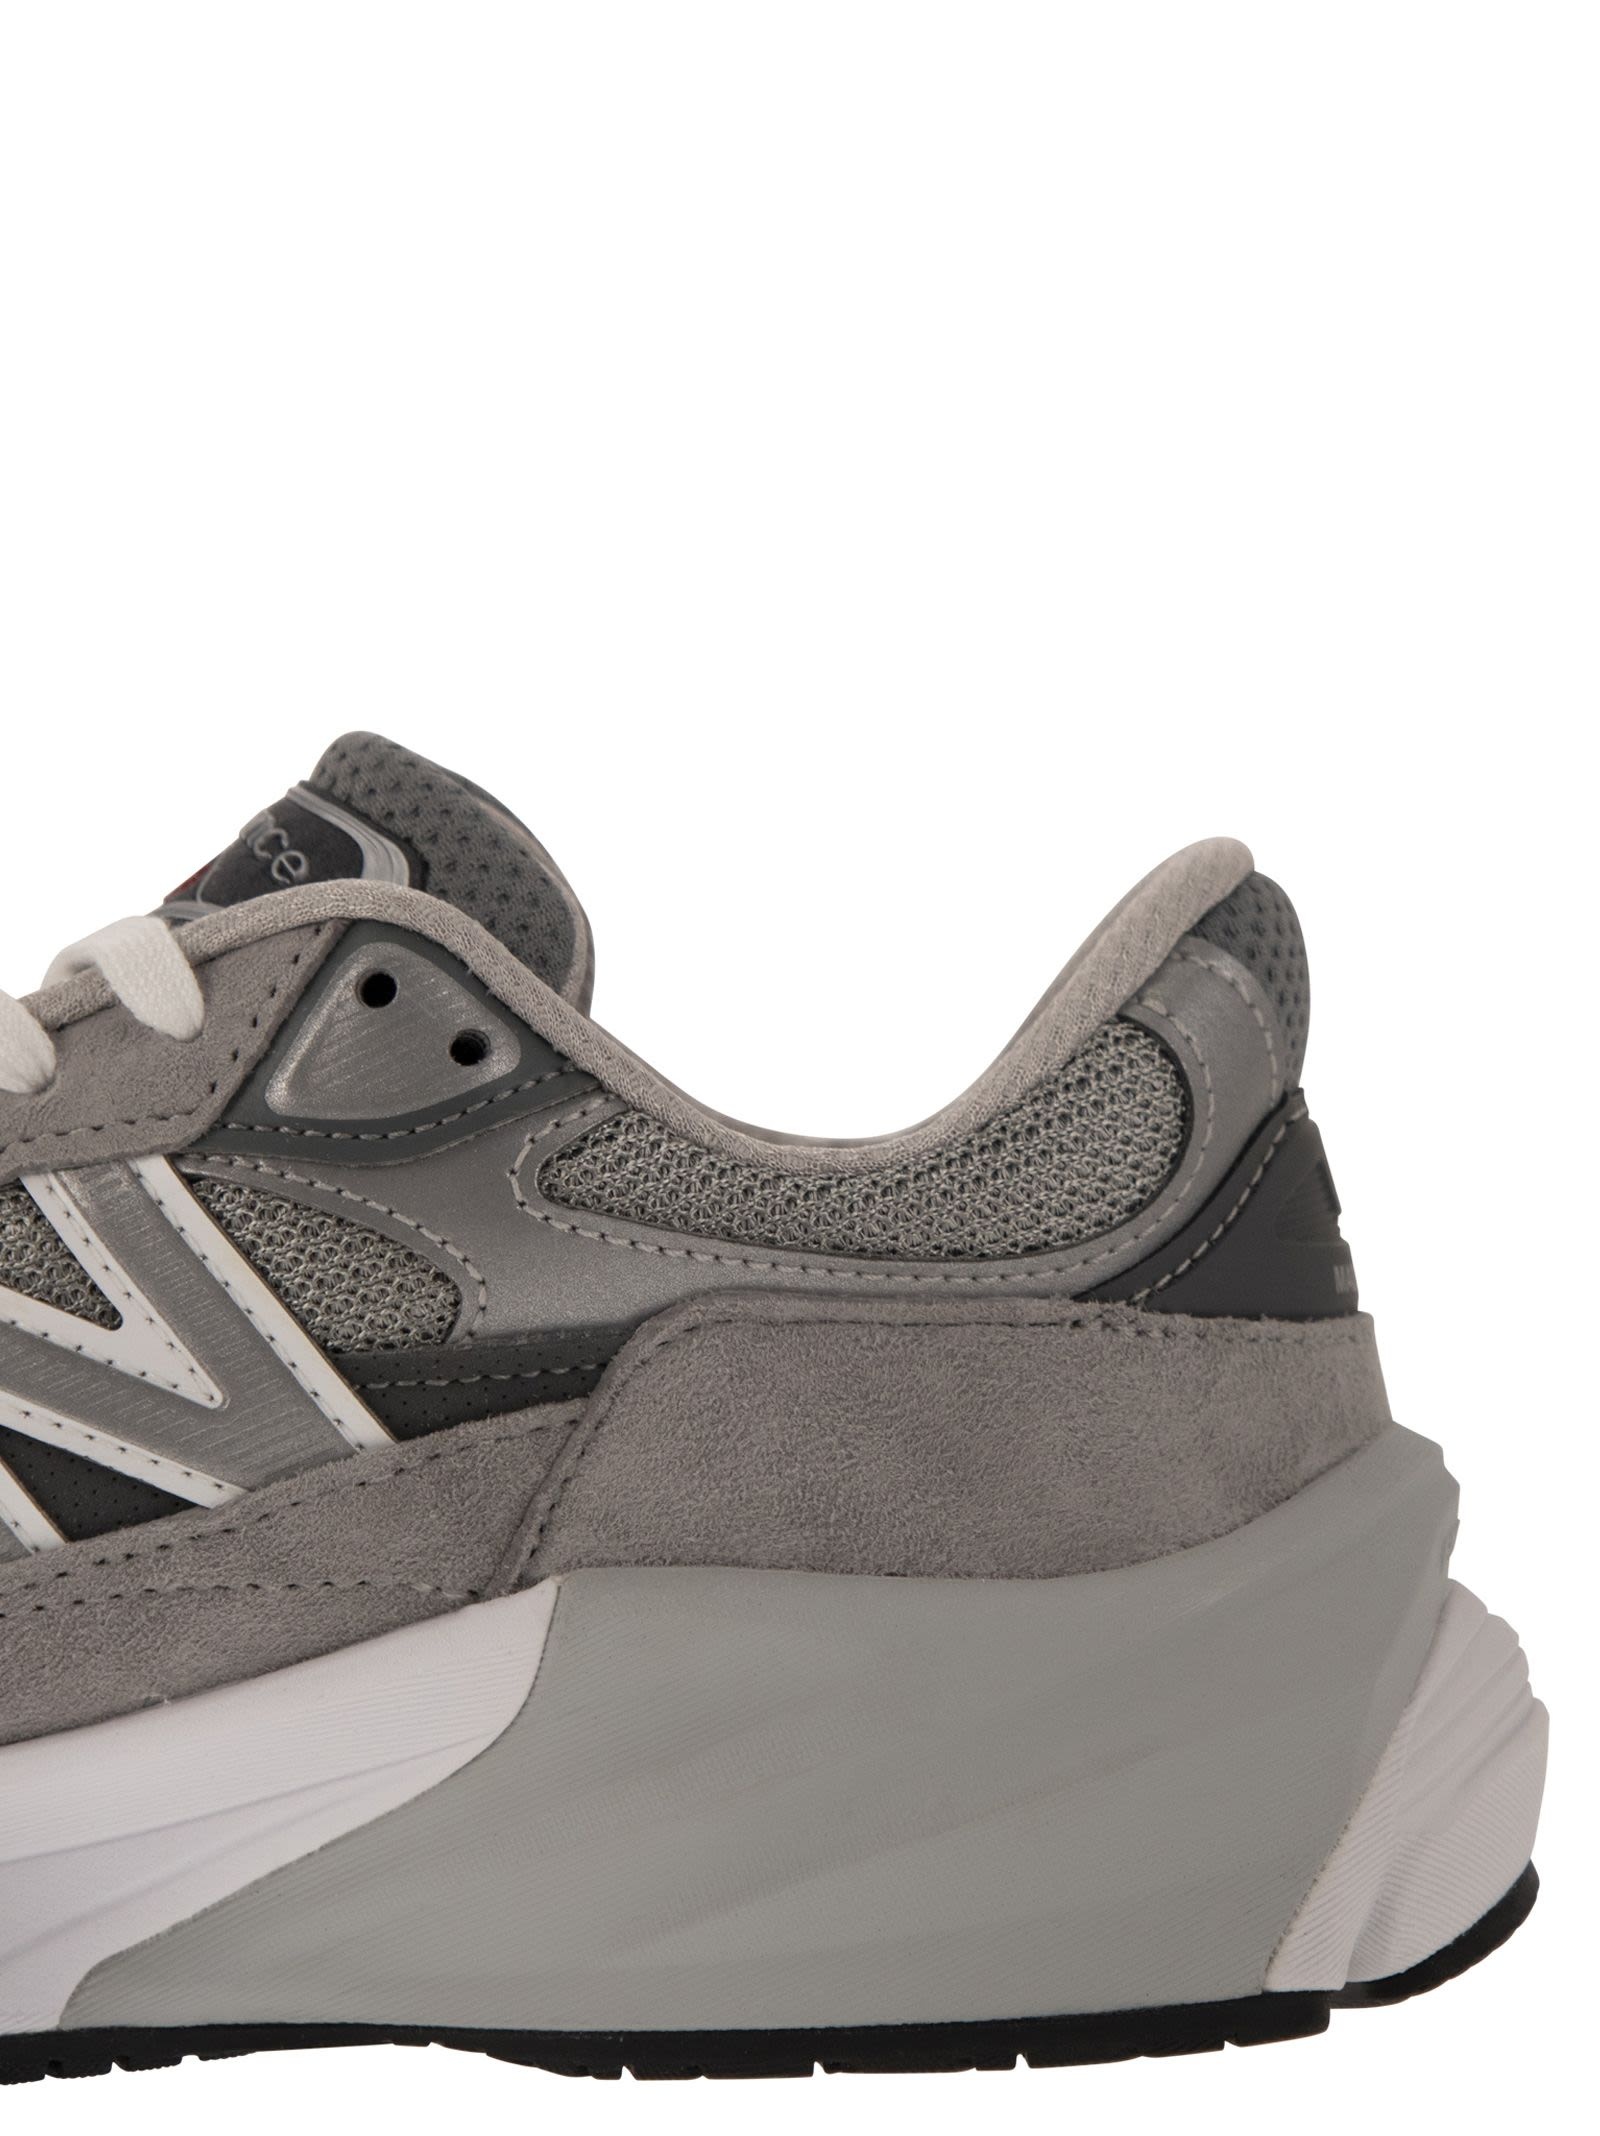 New Balance 990 Sneakers - 7